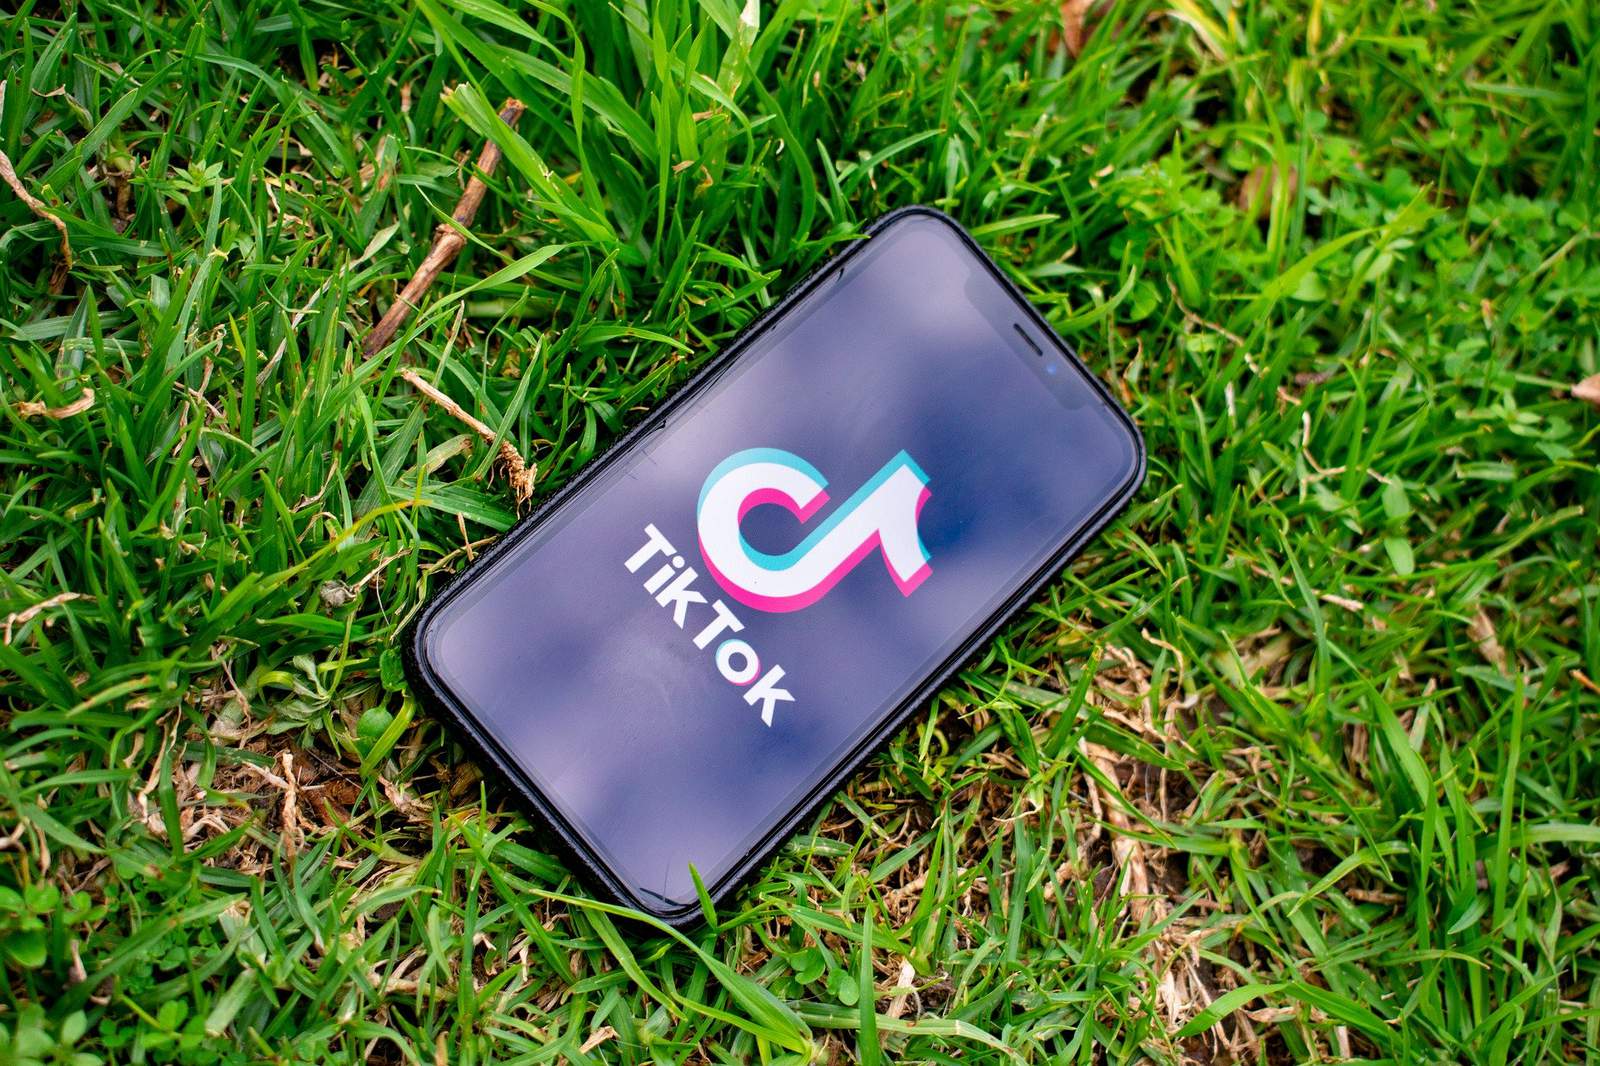 India bans dozens of Chinese apps, including TikTok, citing security reasons